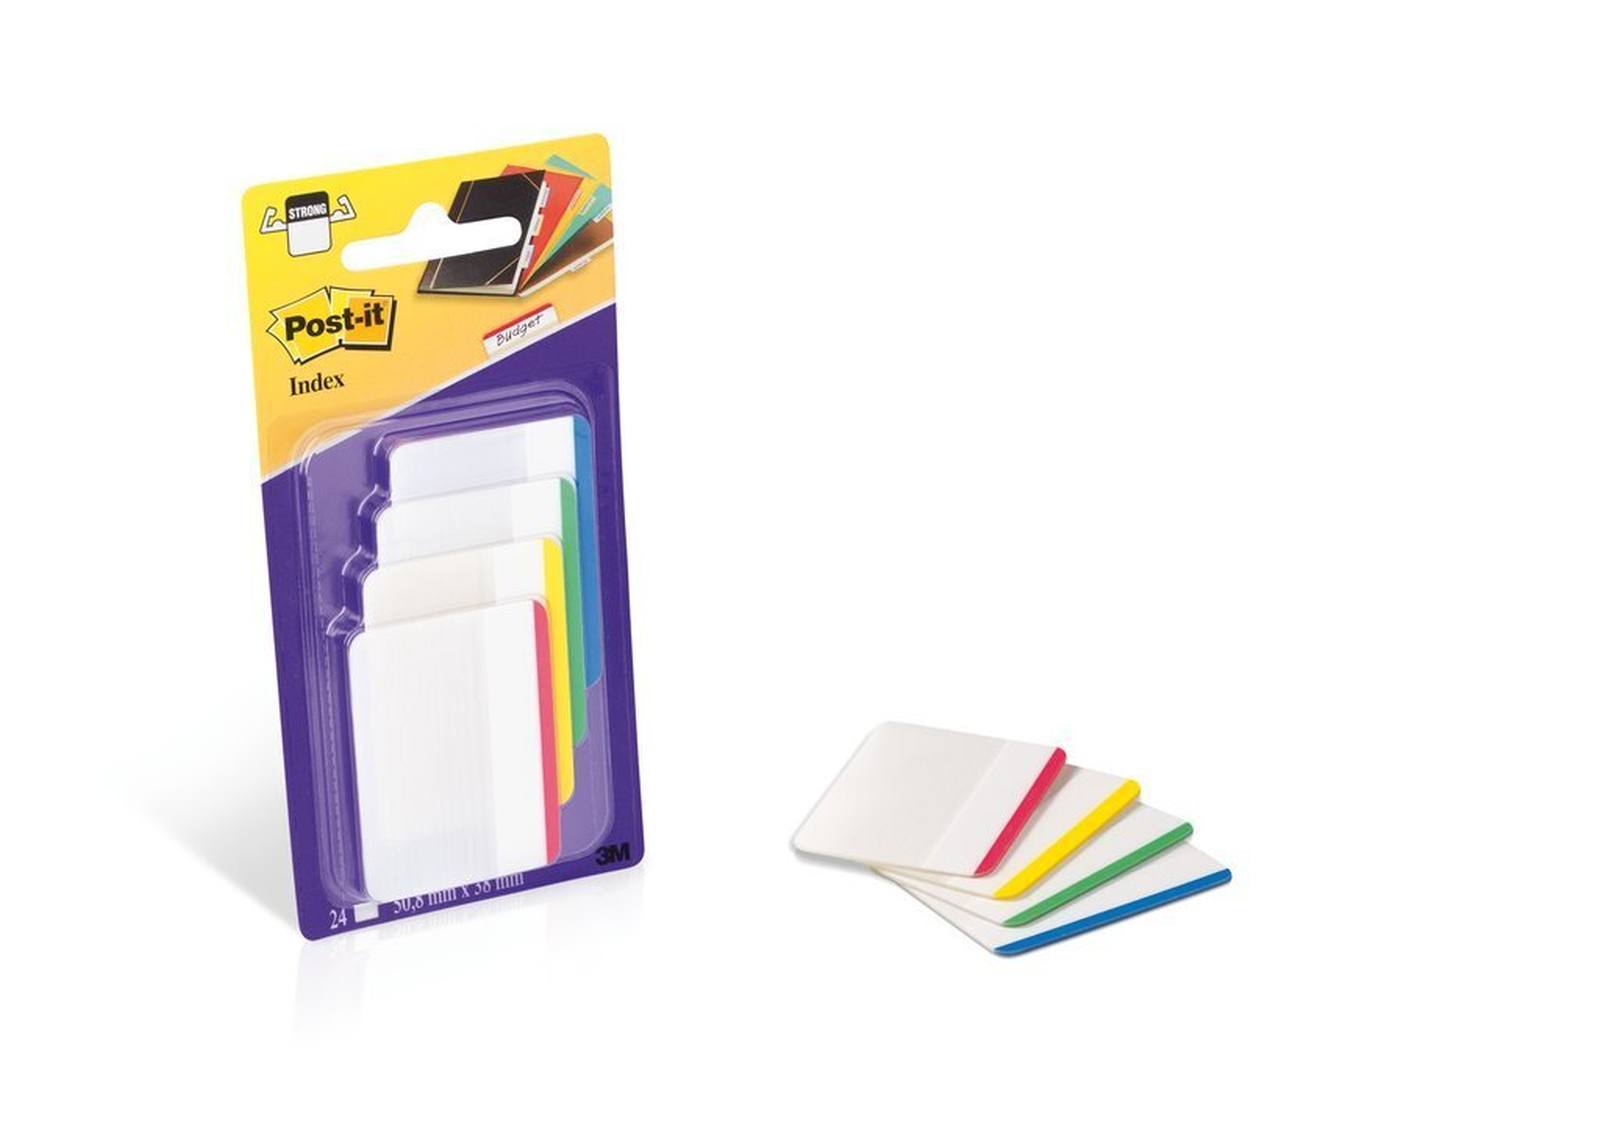 3M Post-it Index Strong 686-F1EU, 50.8 mm x 38 mm, blue, yellow, green, red, 4 x 6 adhesive strips